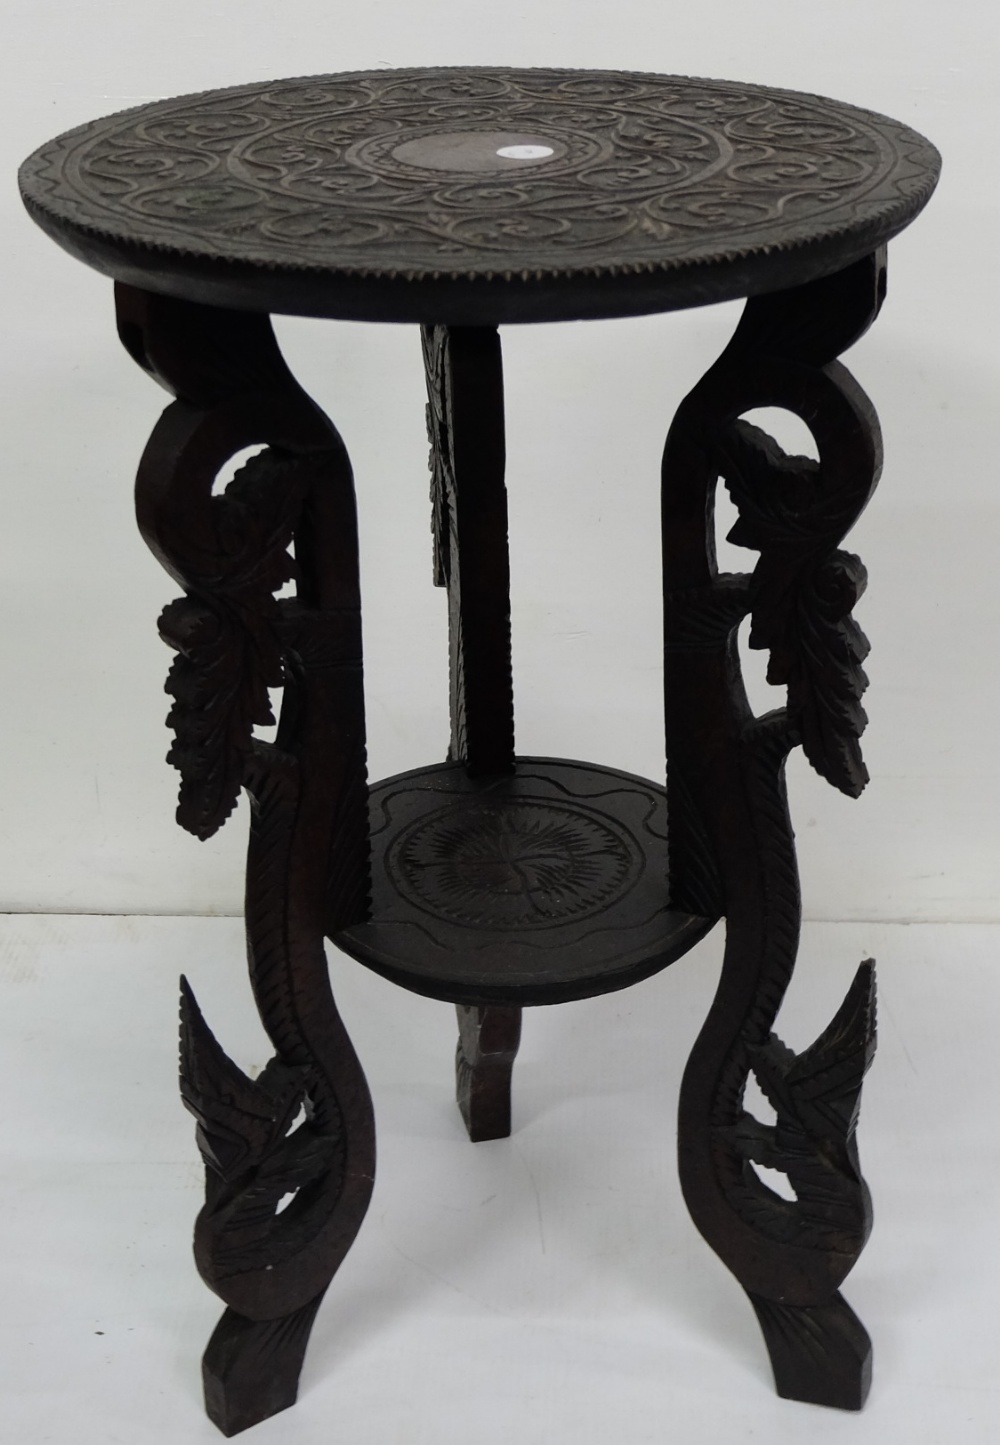 Carved Oak Occasional Table with a circular top, 16” dia, - Image 2 of 2